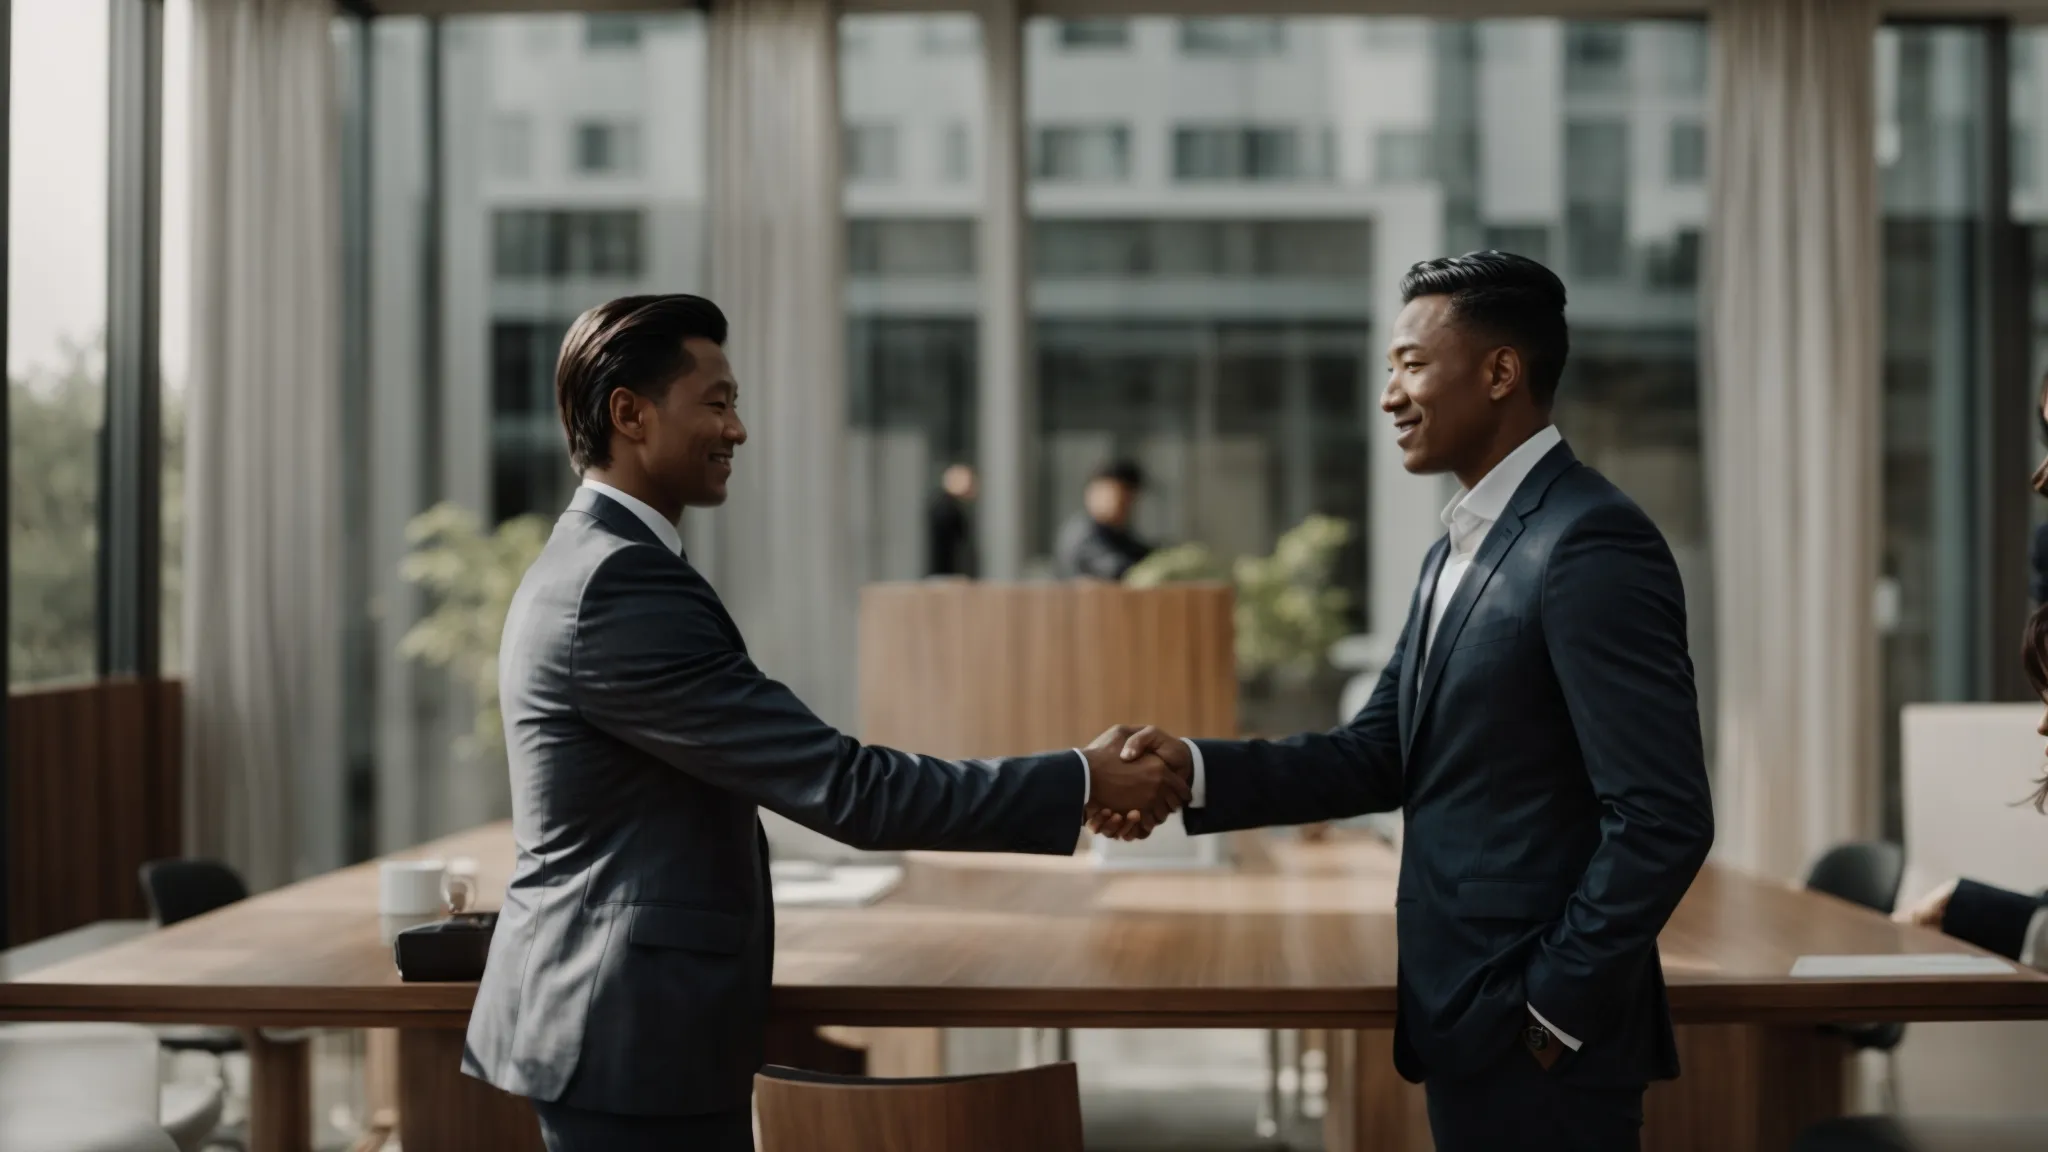 two business professionals shake hands across a table as a symbolic gesture of agreement after finalizing a thorough international contract.